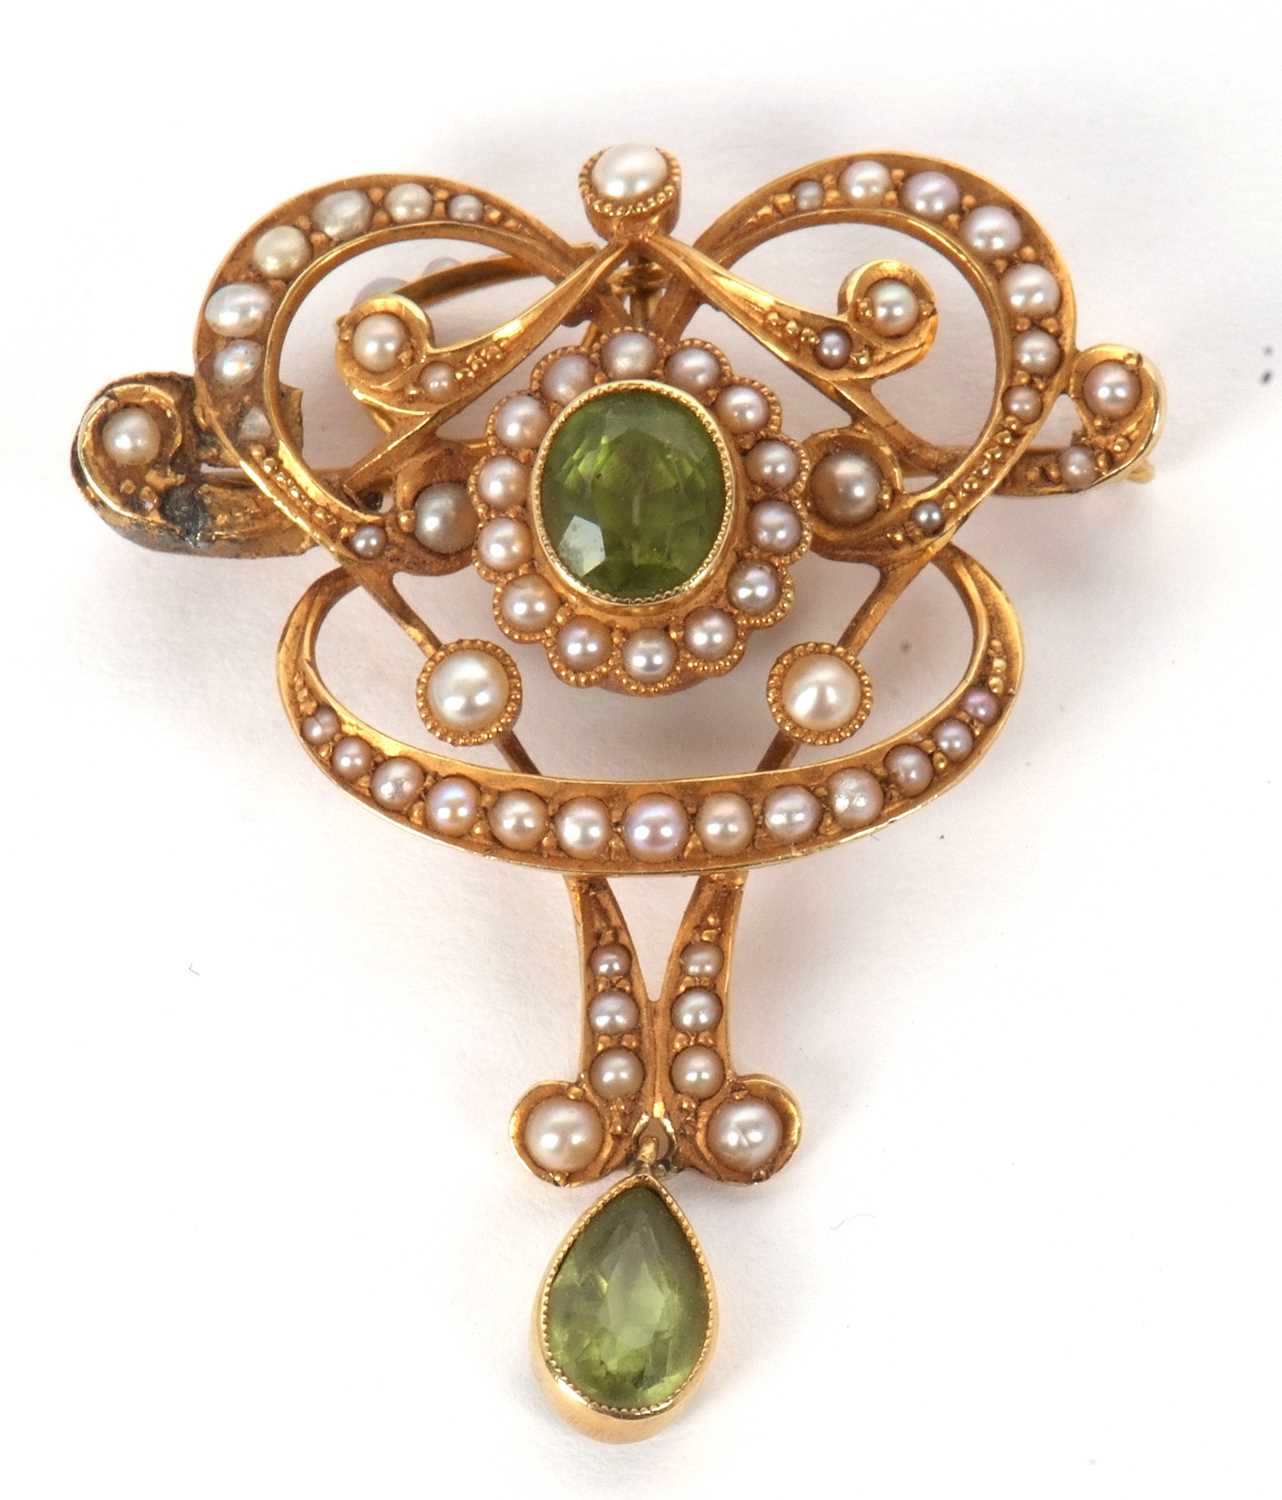 Two gemset brooches, the first an Art Nouveau peridot and seed pearl brooch/pendant, 32mm wide, - Image 3 of 6